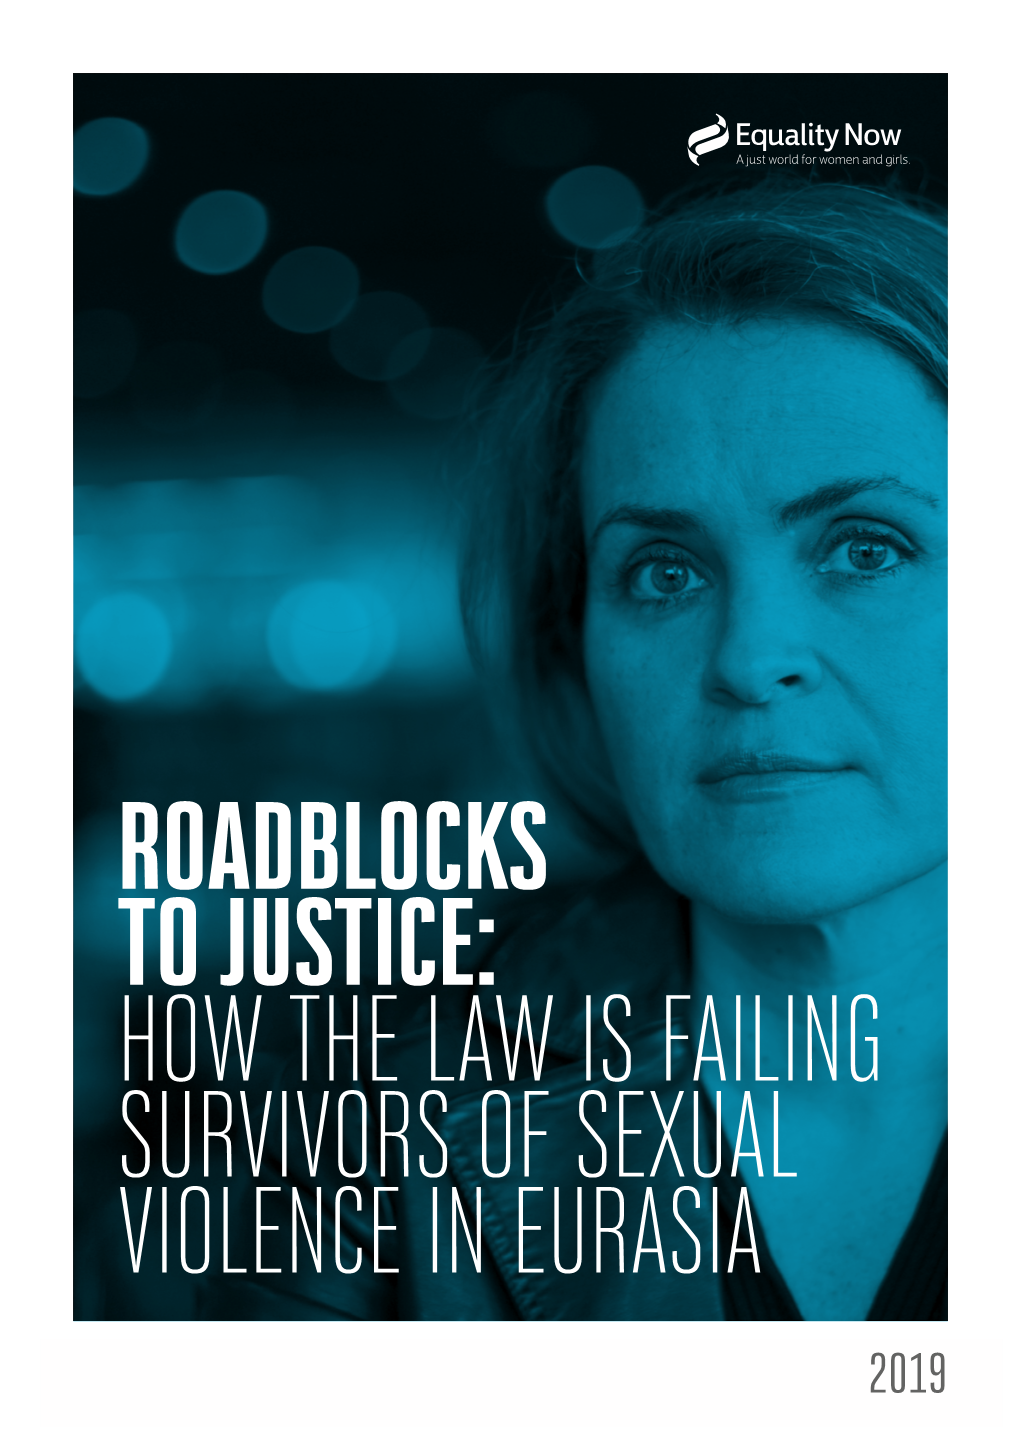 Roadblocks to Justice: How the Law Is Failing Survivors of Sexual Violence in Eurasia